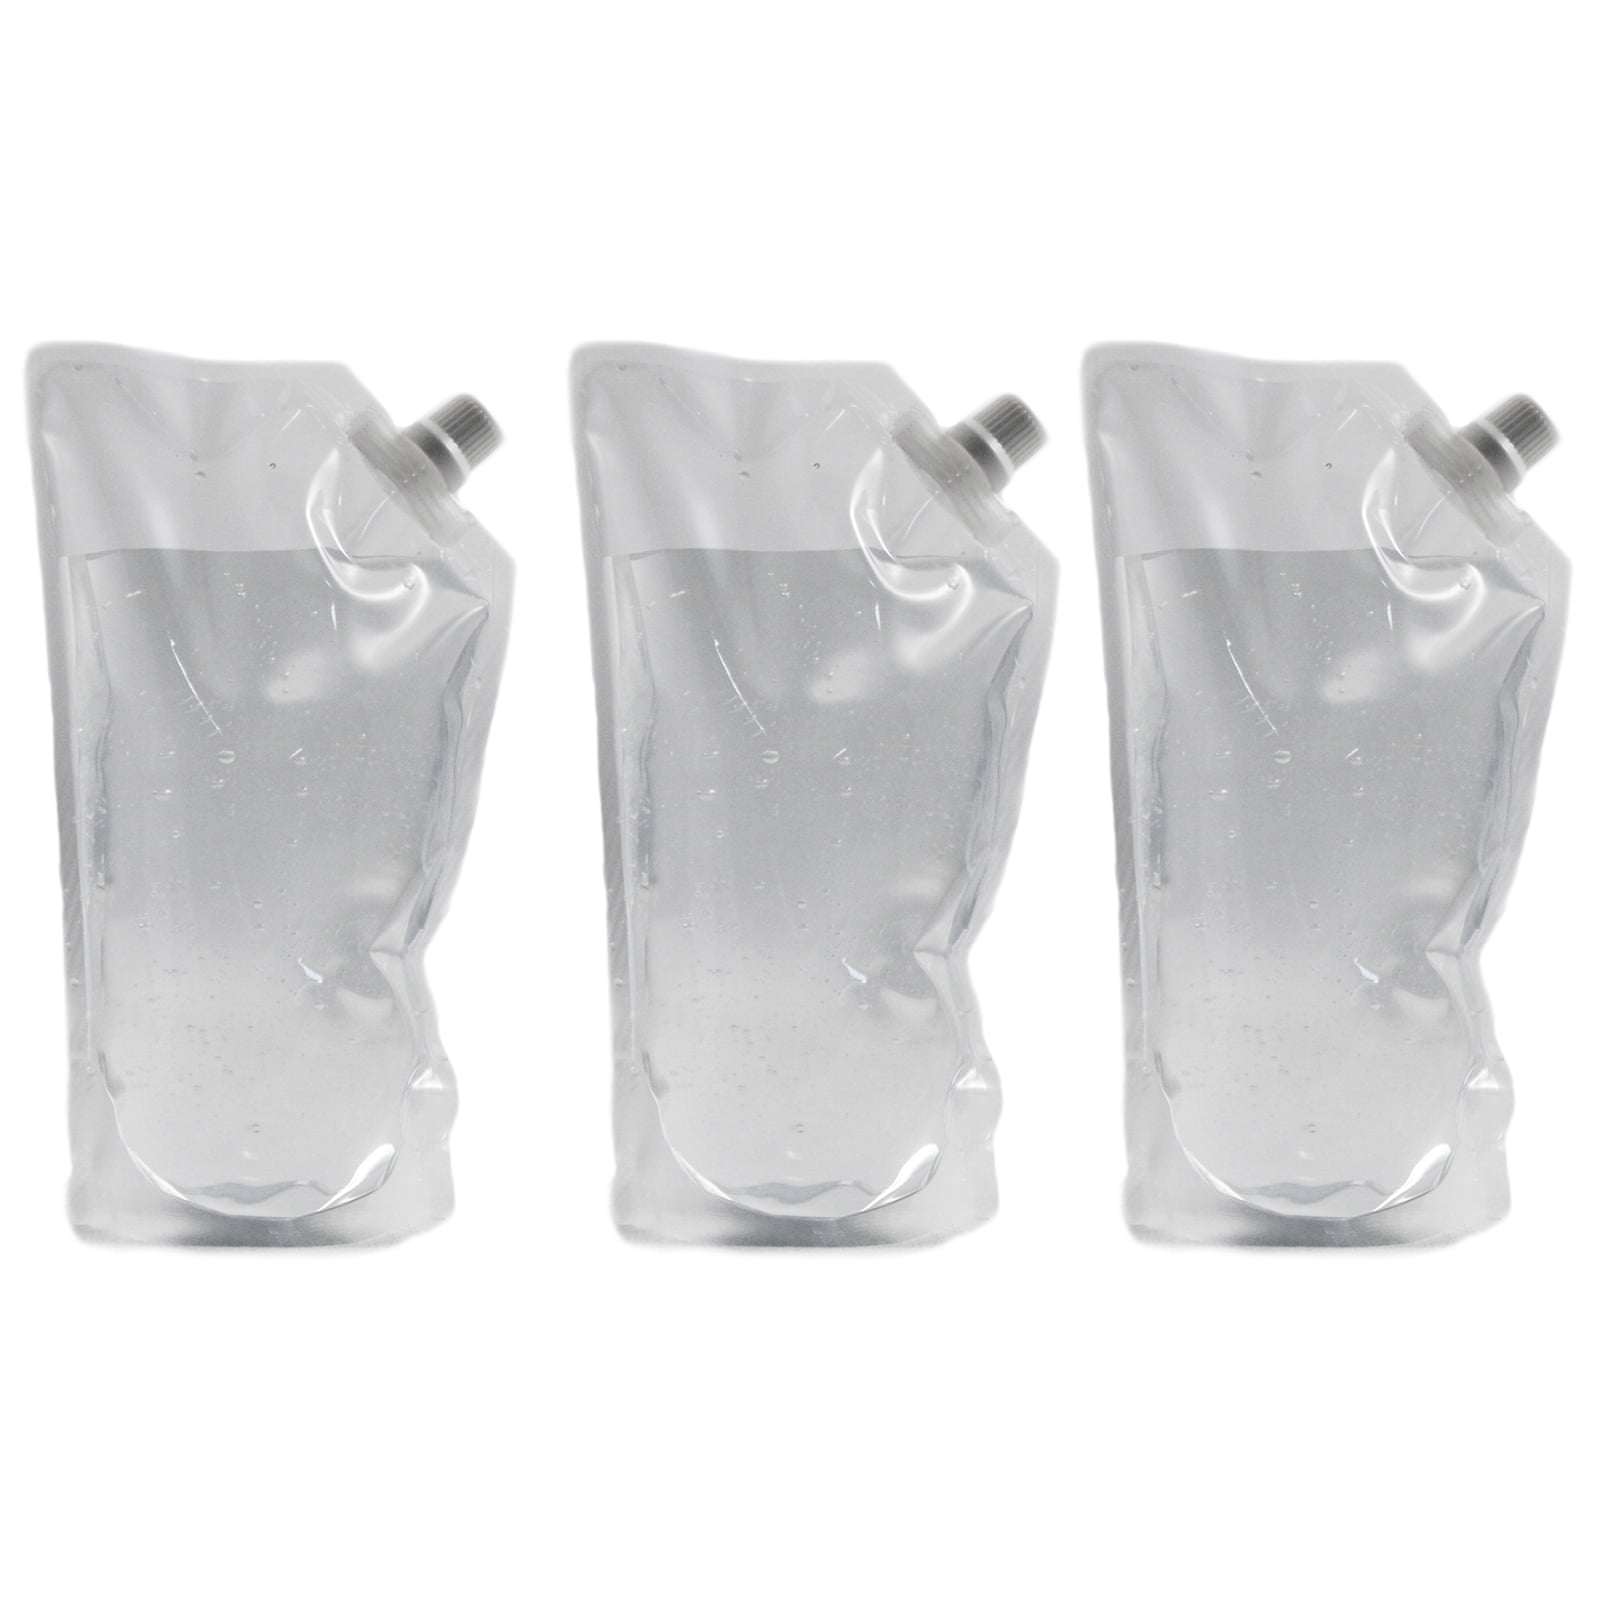 20X Reusable Drinking Flasks with Funnel Concealable Plastic Liquor Pouch Bag 